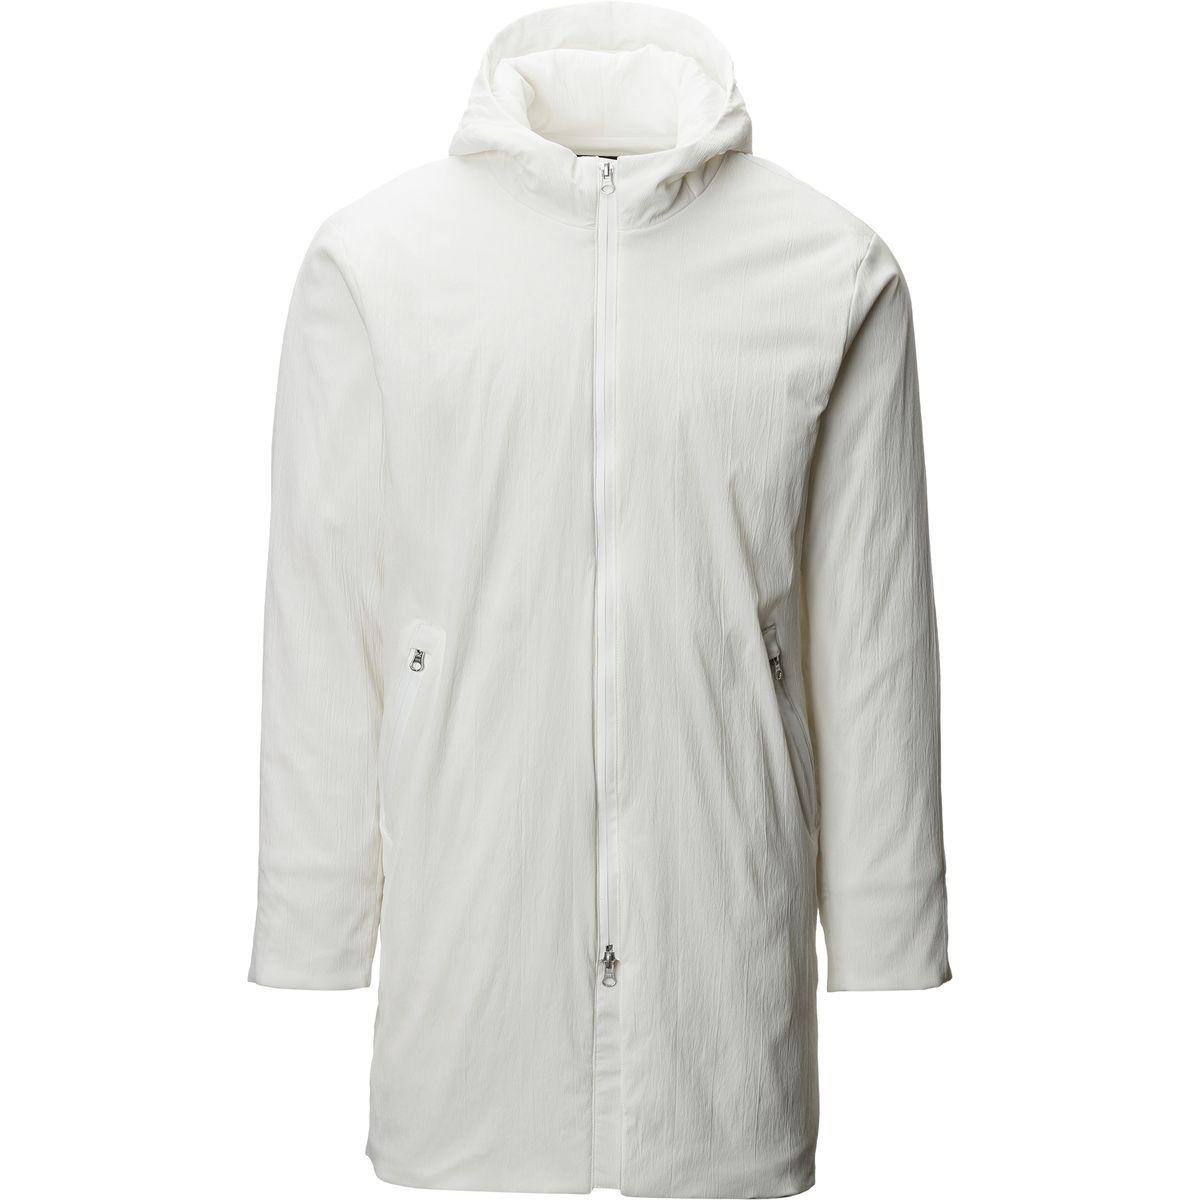 reigning champ insulated sideline jacket